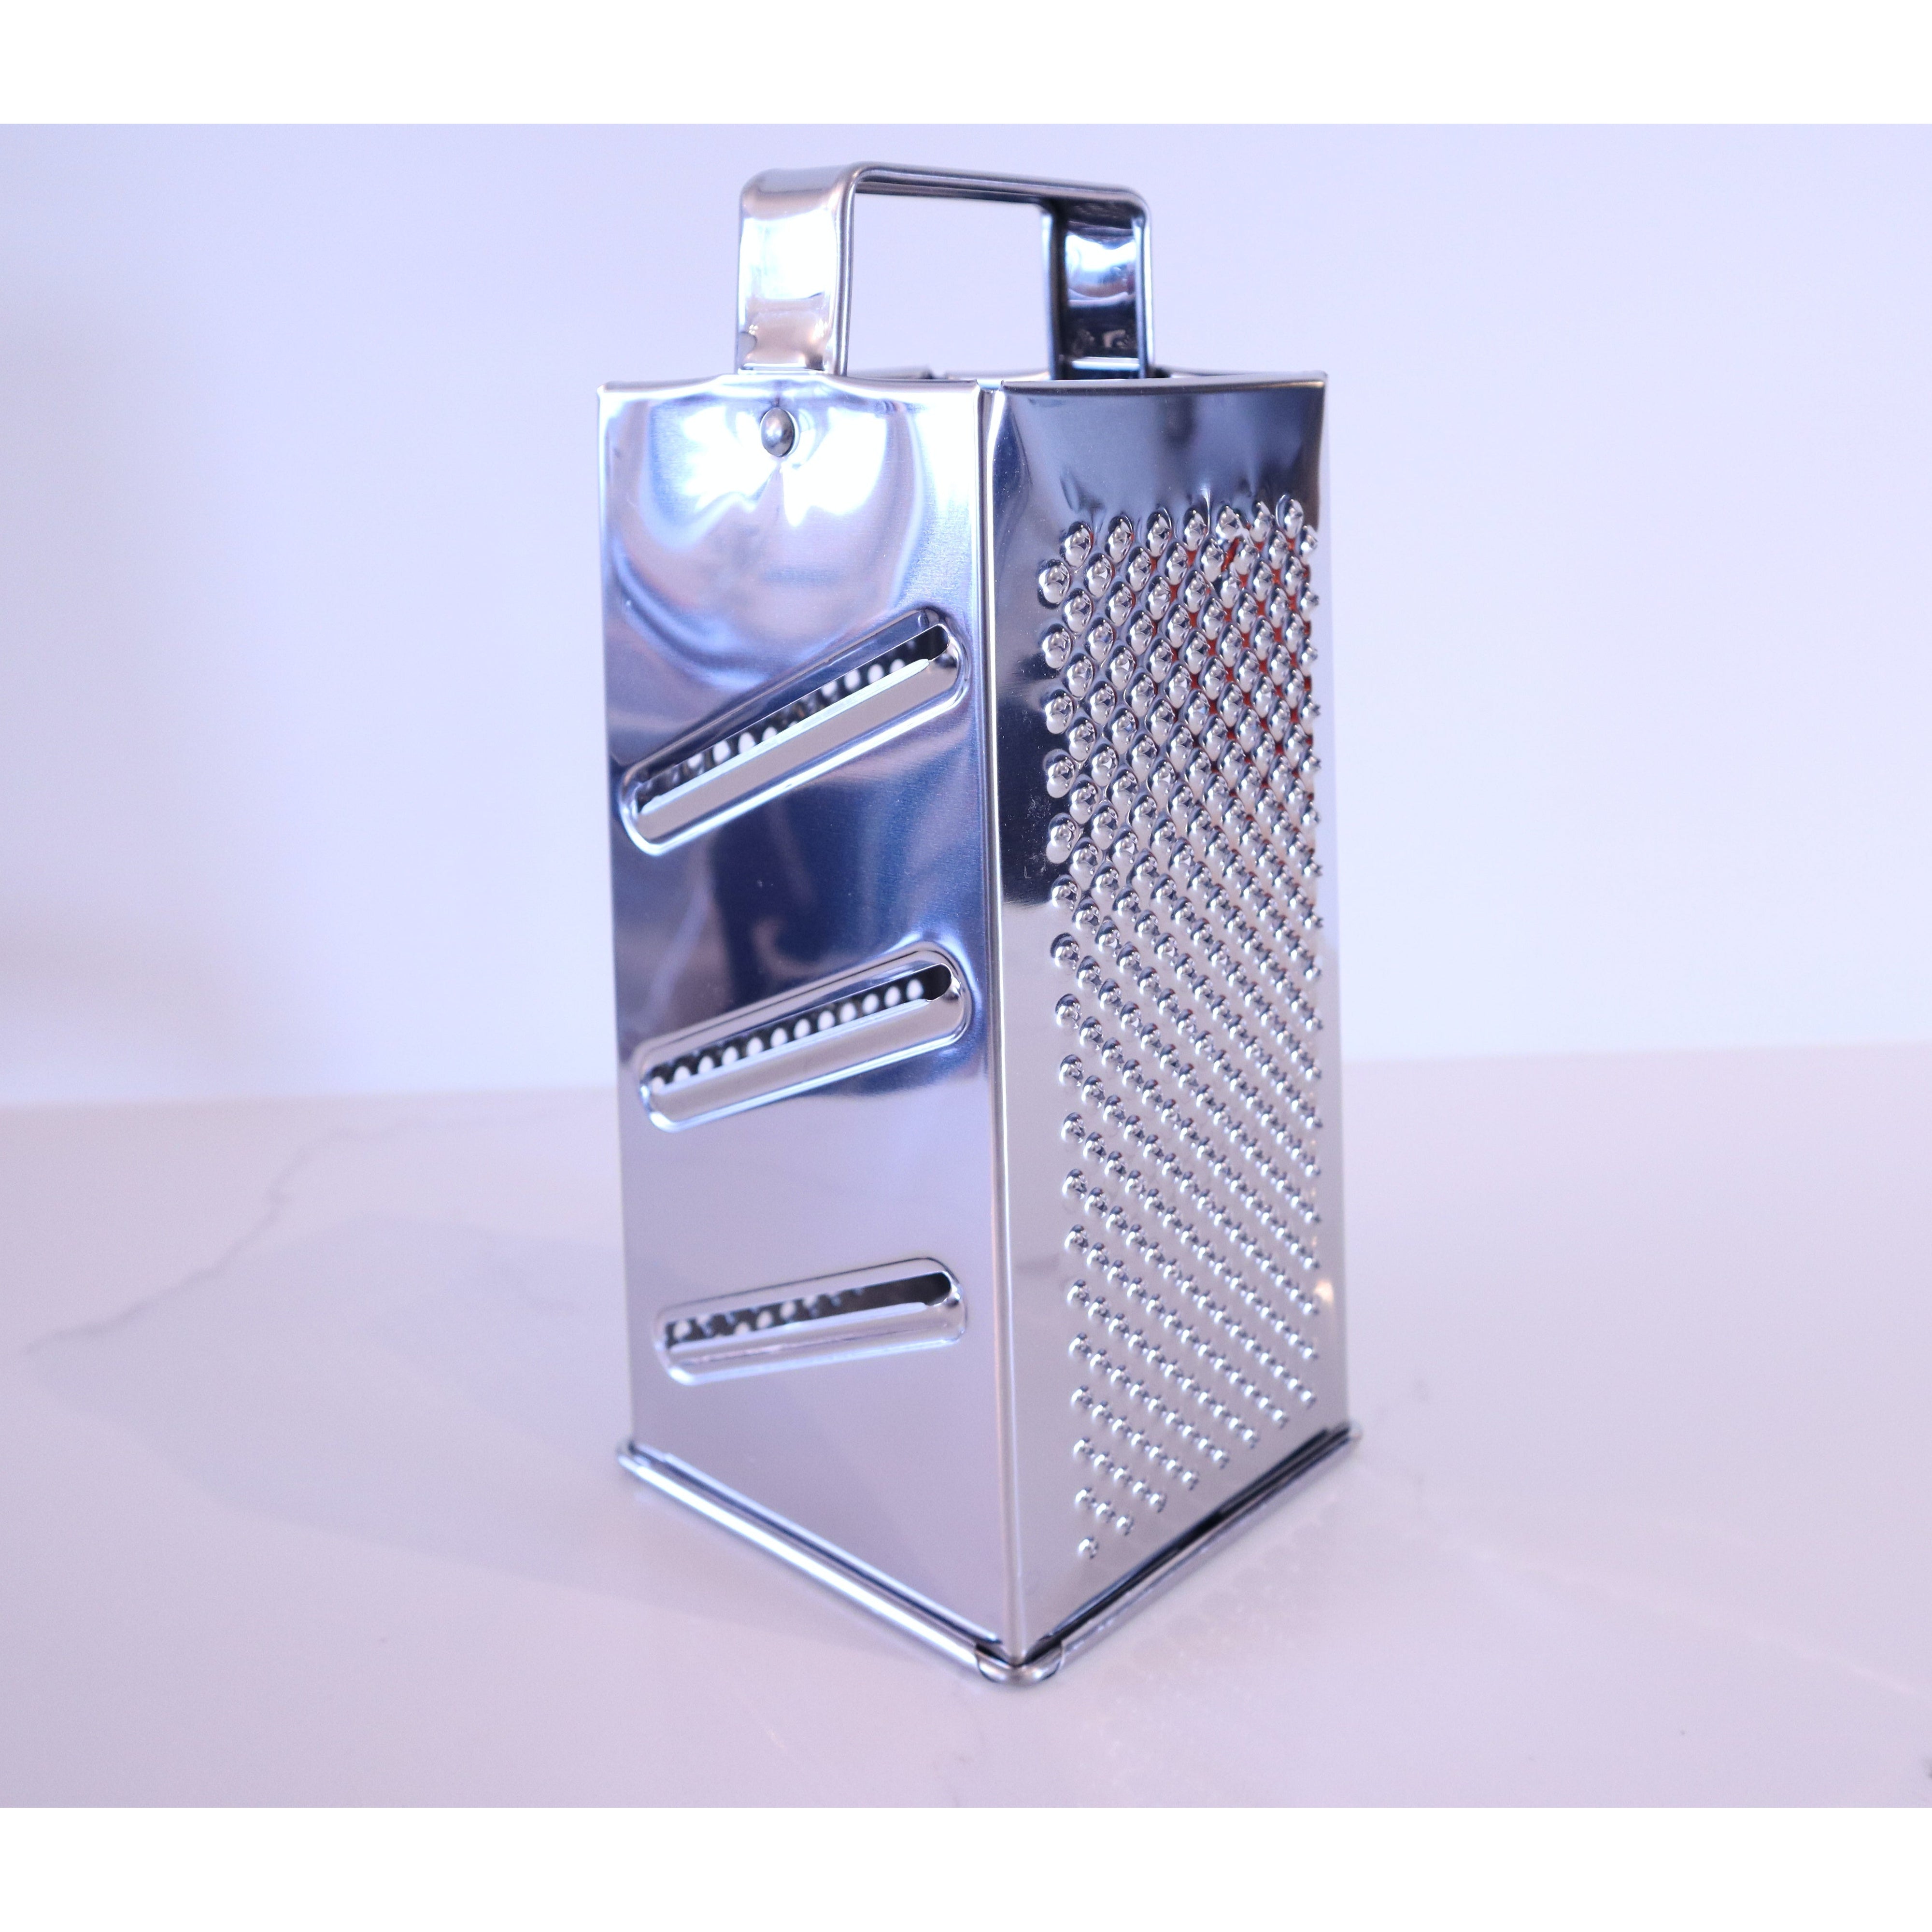 Eppicotispai Stainless Steel Box Cheese Grater 24 cm - Made in Italy Side View Wide Cut 